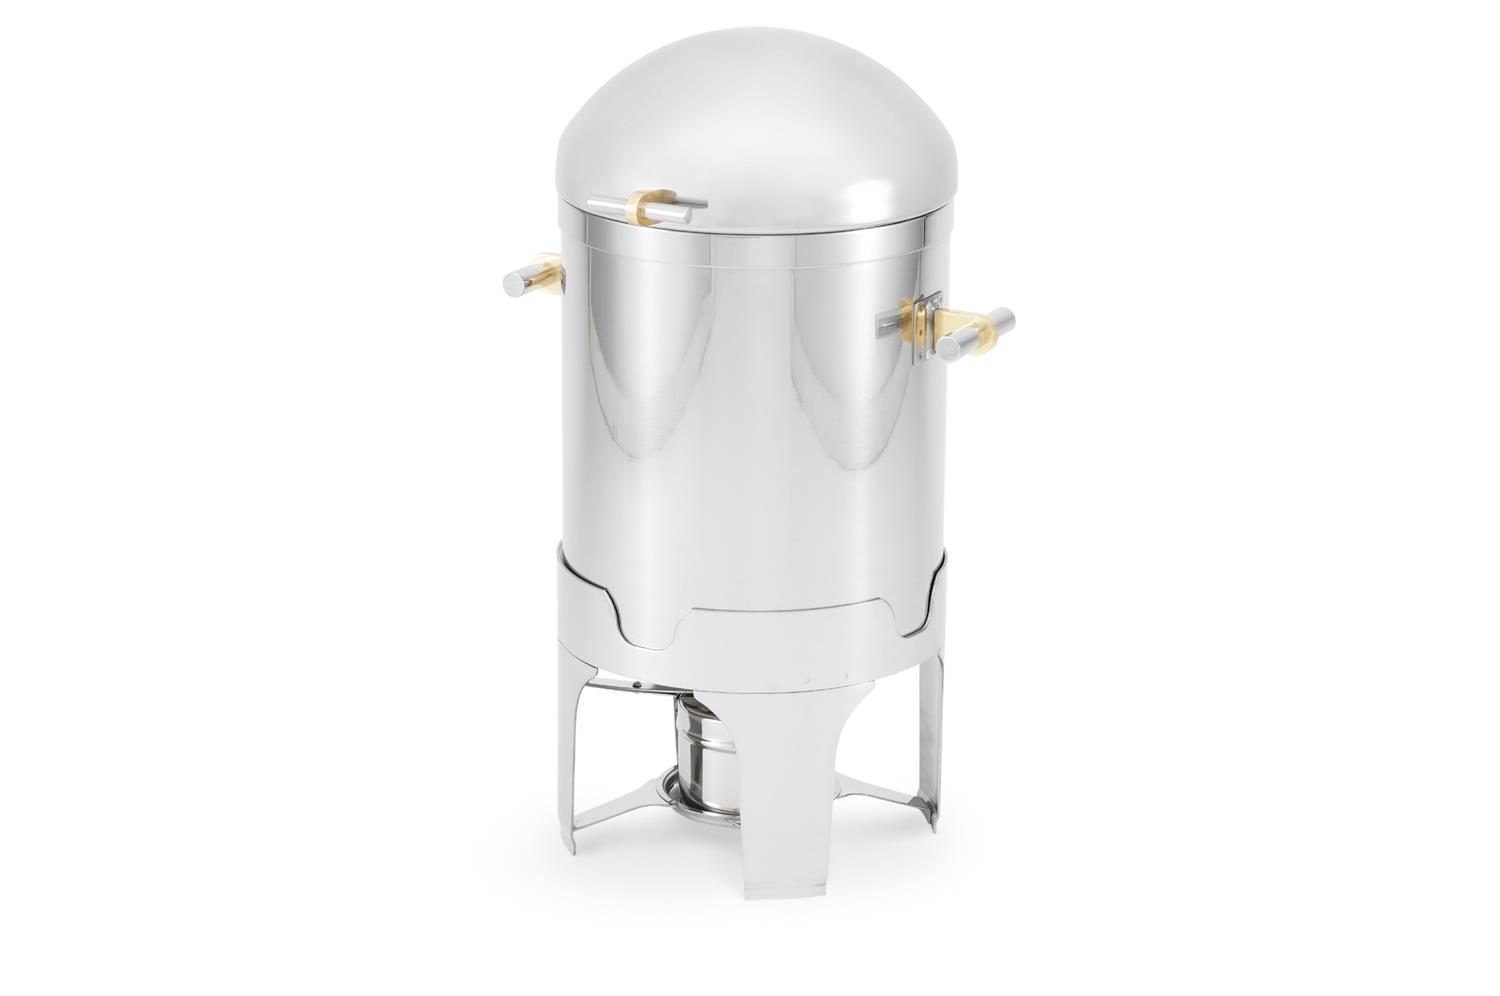 Vollrath 46089 Soup and gravy chafer dome cover